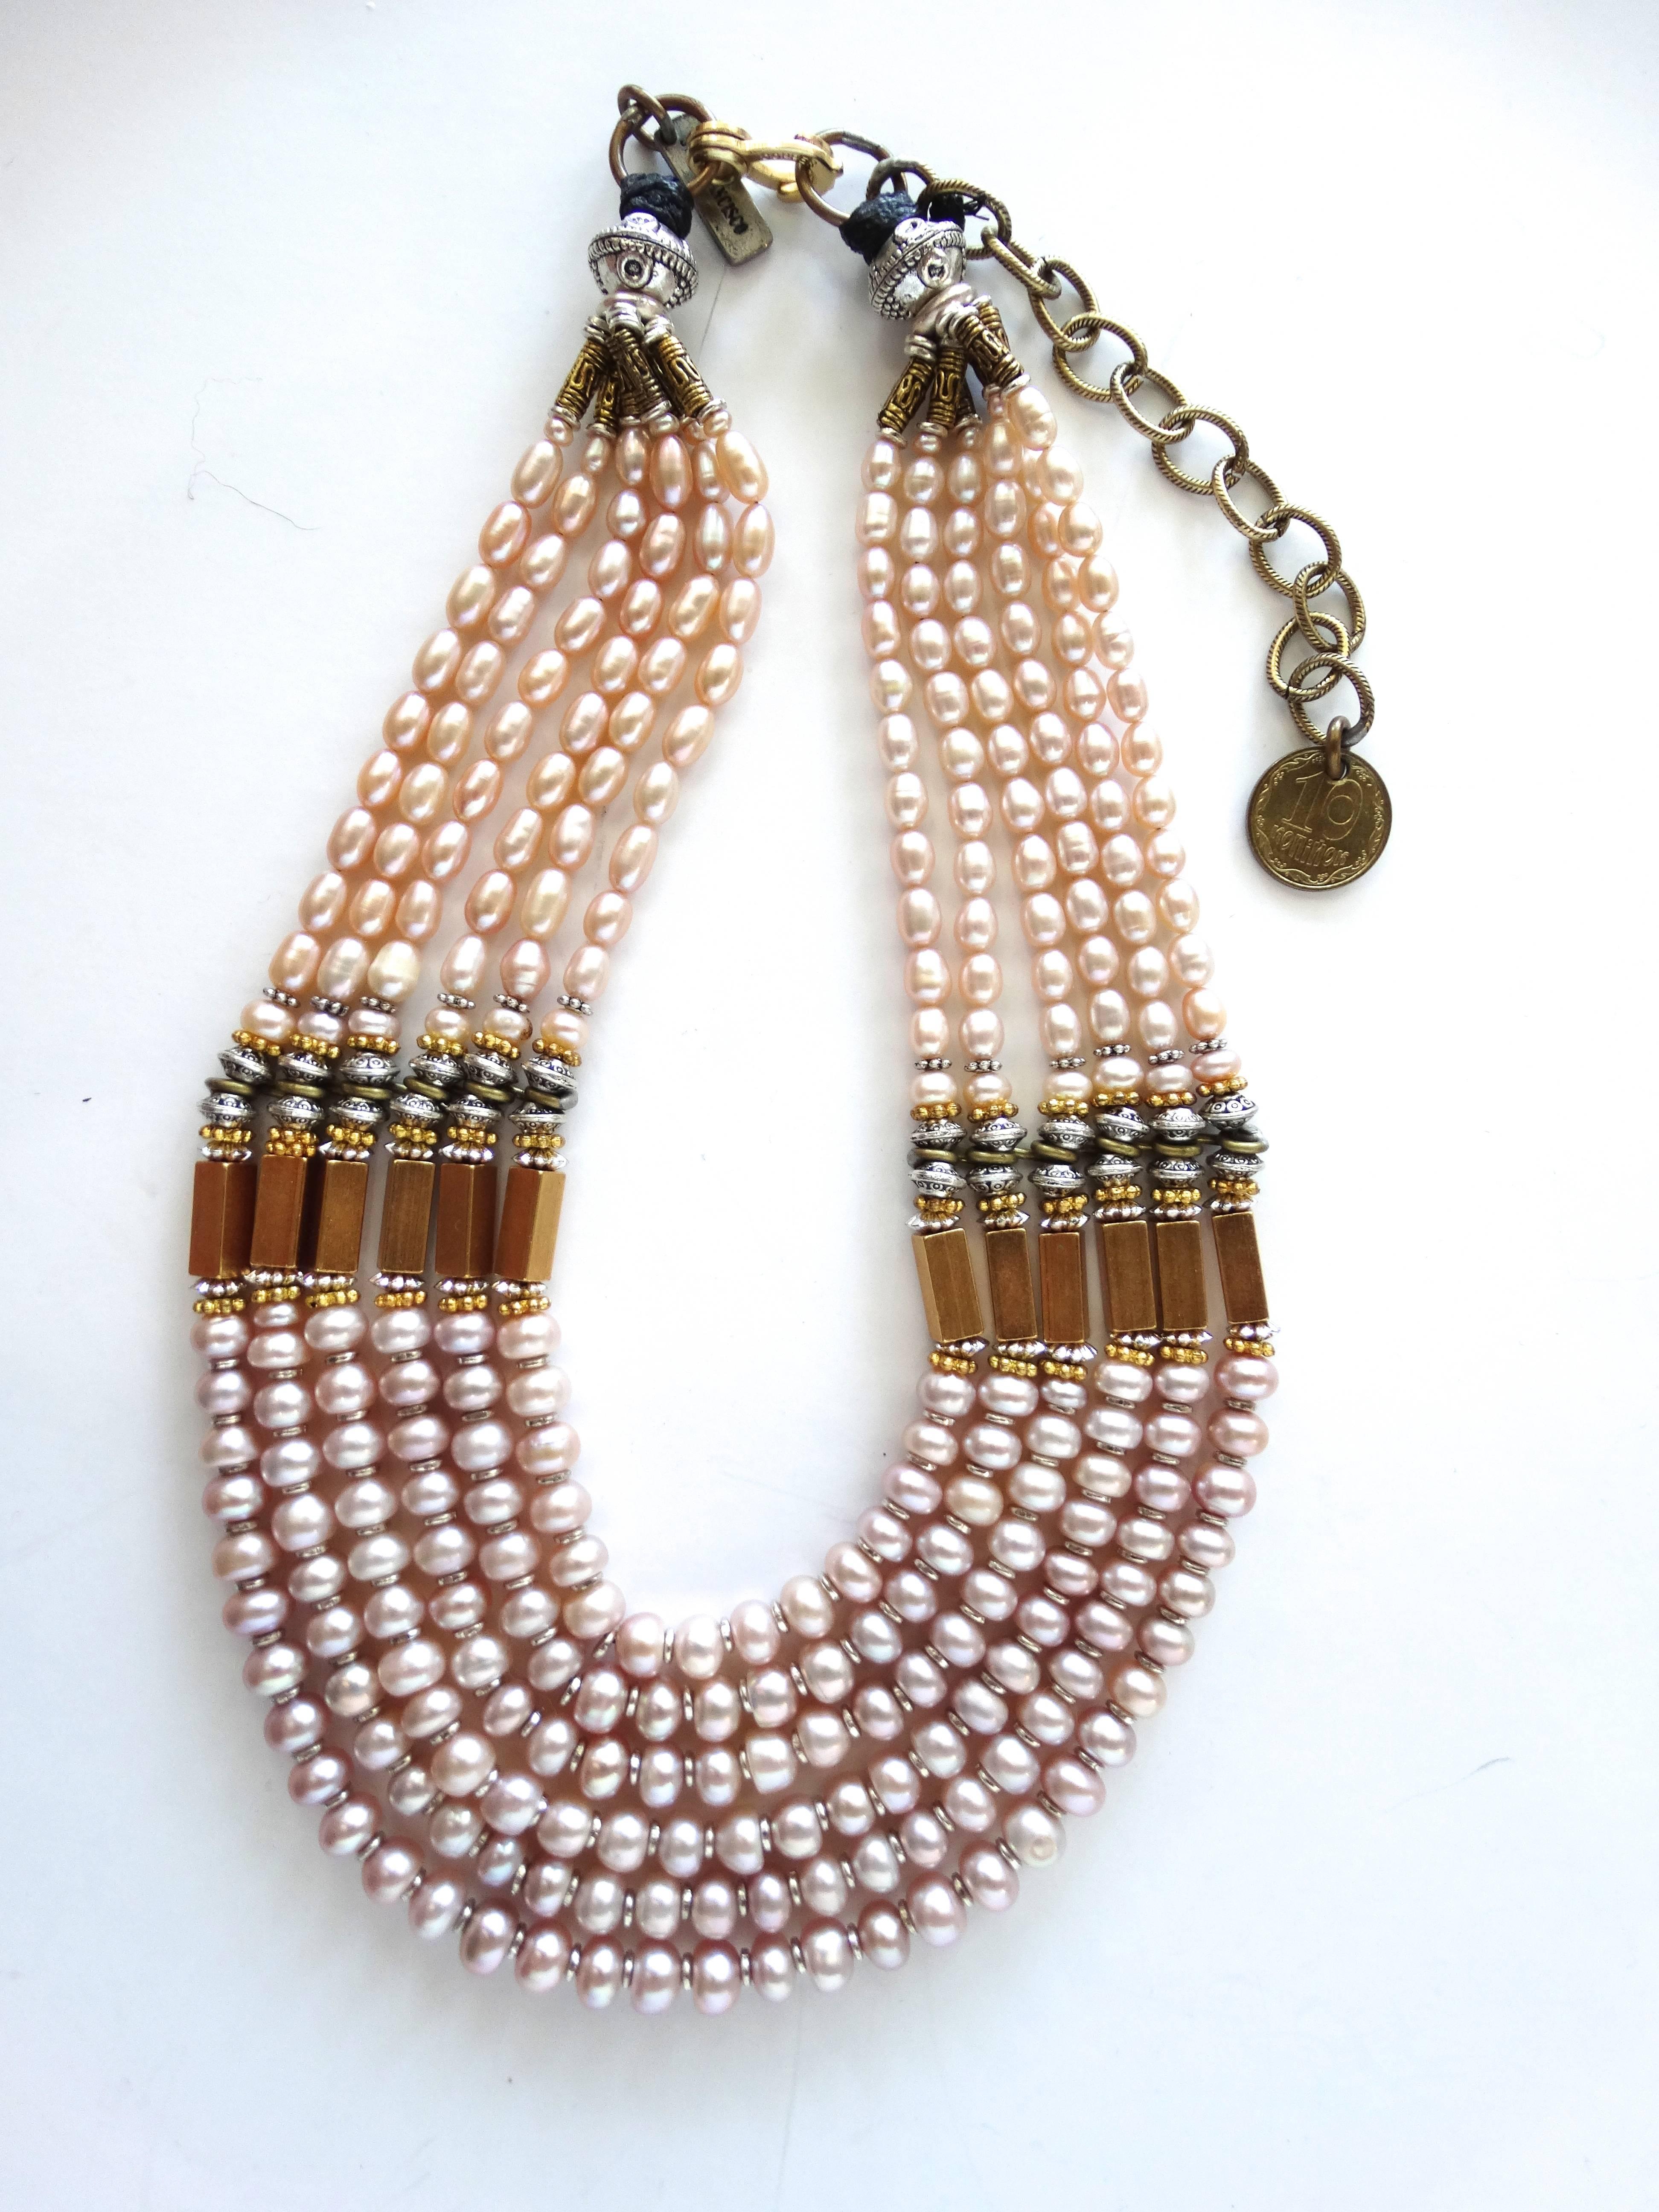 A true one of a kind Masha Archer Bib Necklace circa 2007. After designing clothes, Masha Archer devoted her talents to jewelry, her most enduring and lauded vocation. Like Masha, each piece is unique! Exquisite, Masha Archer pearl rose bib necklace